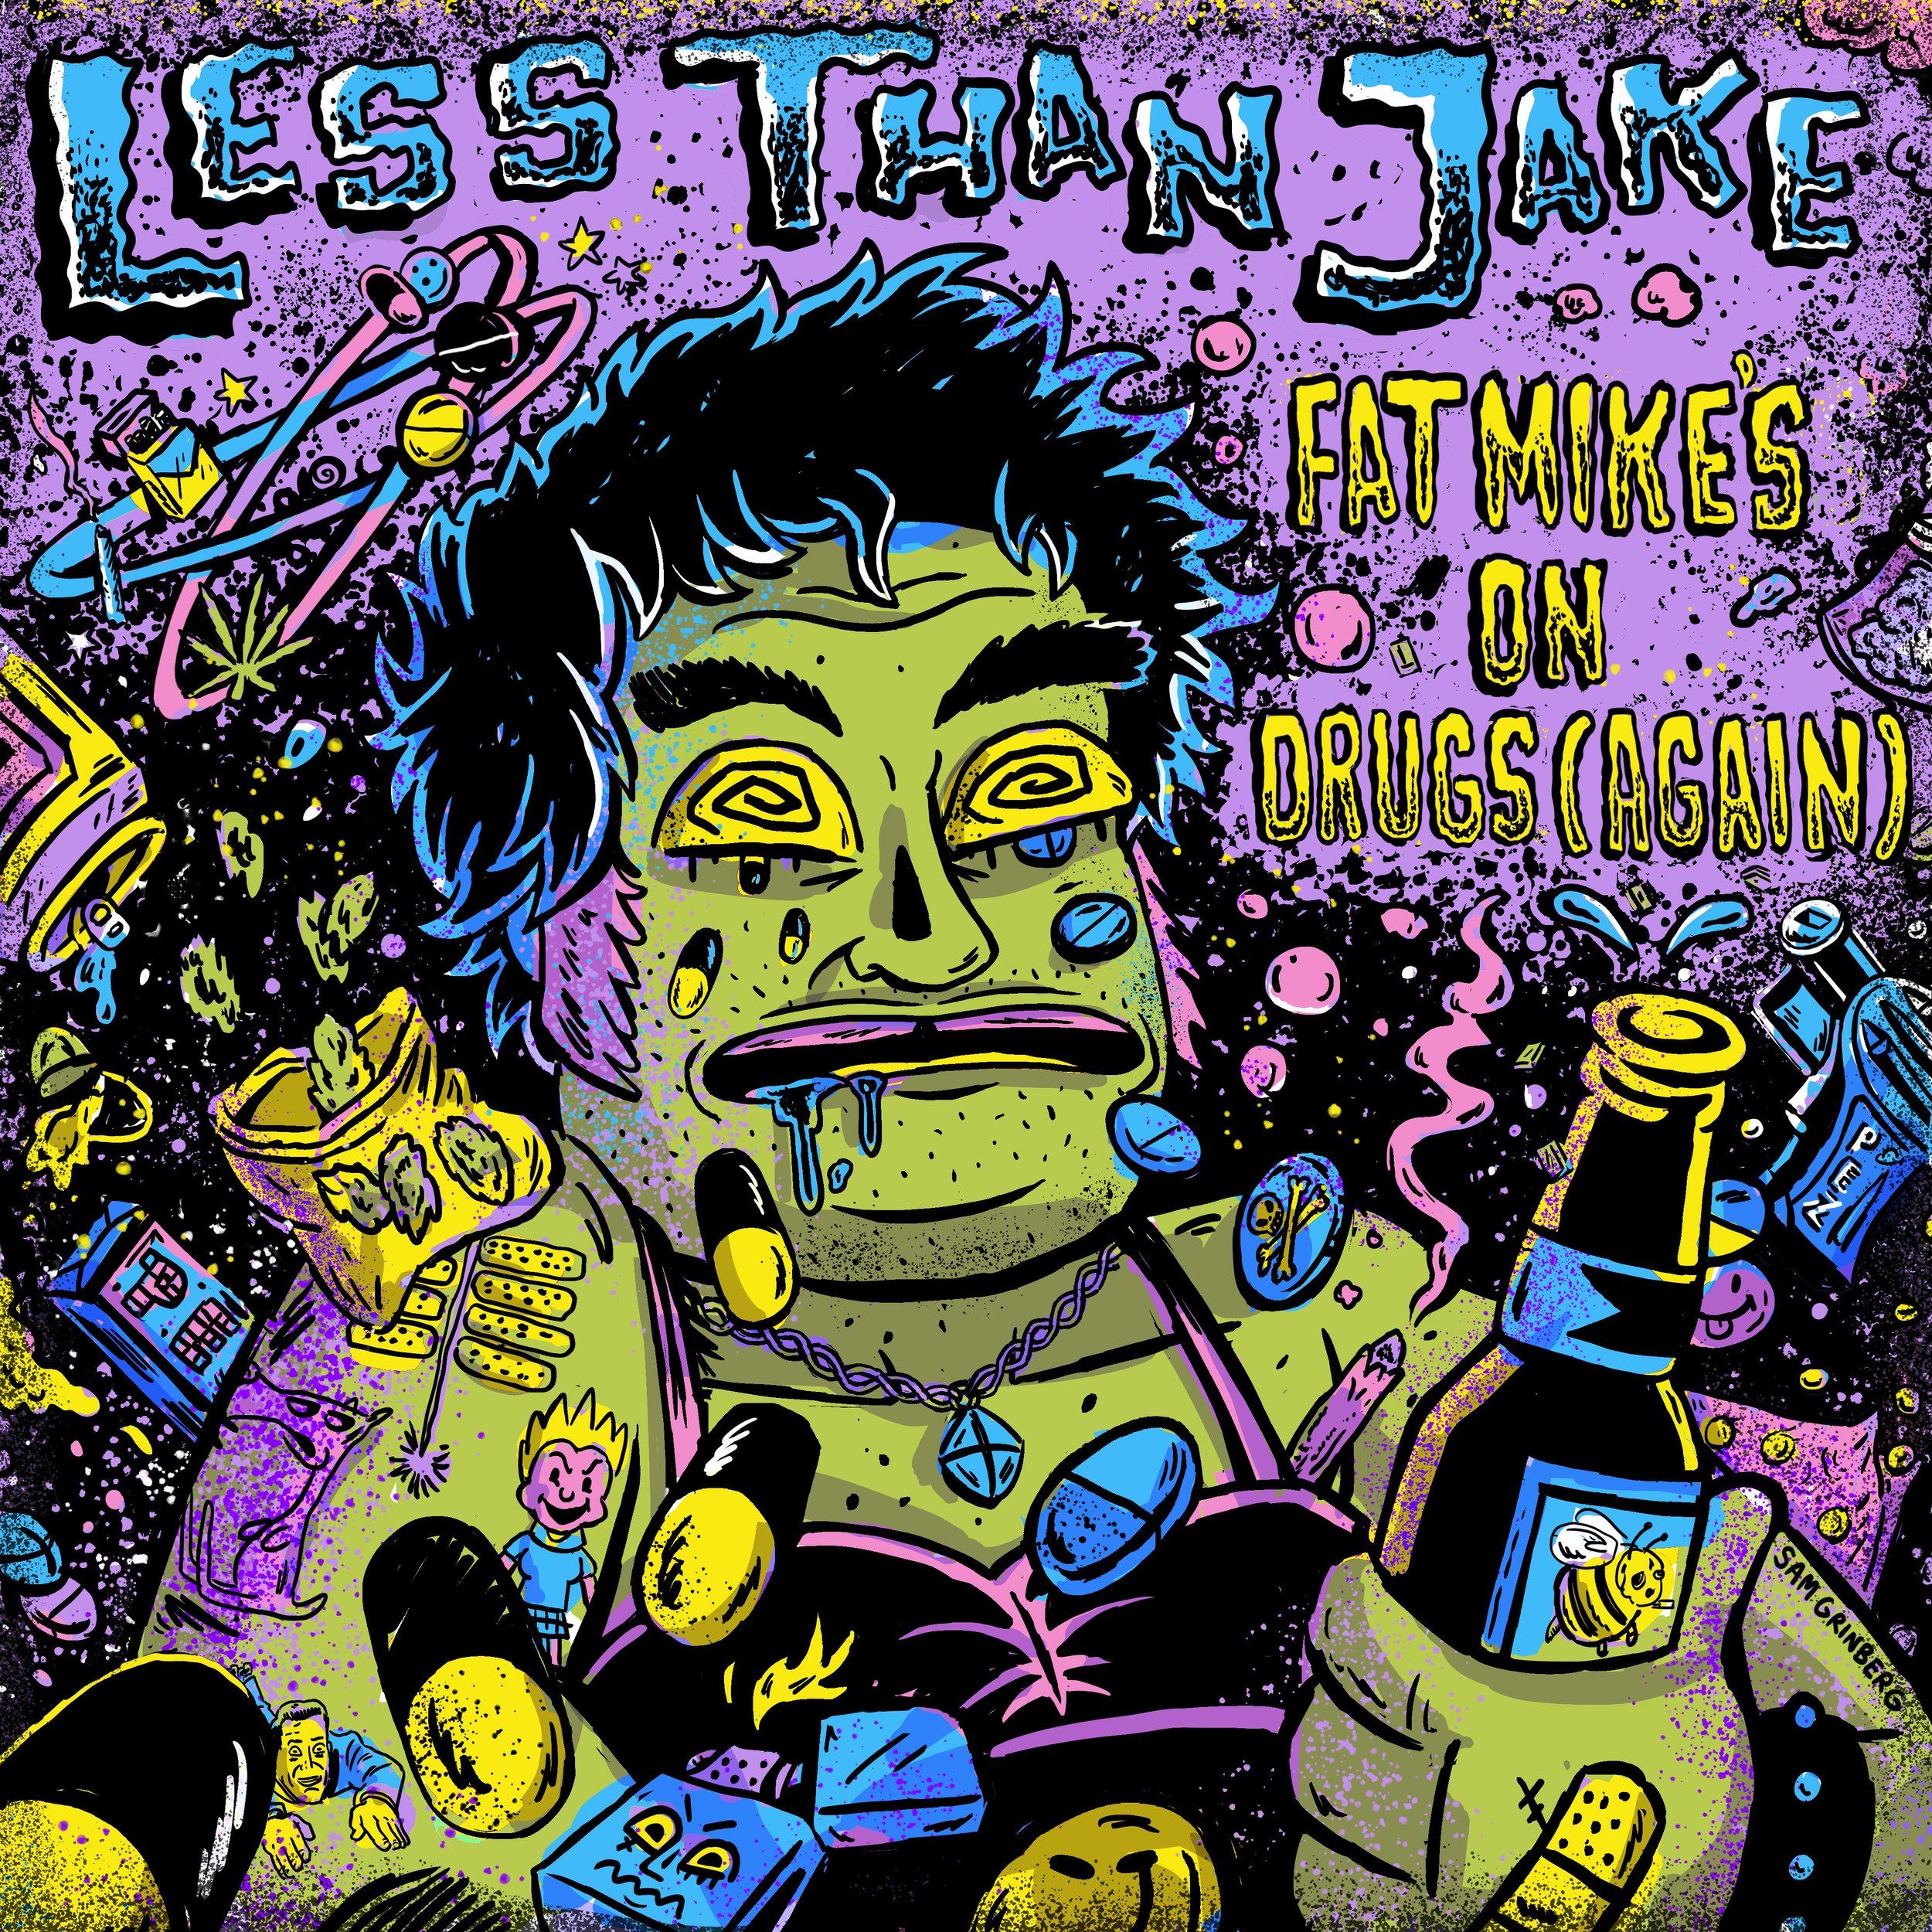 Less Than Jake x NOFX "Fat Mike's On Drugs"